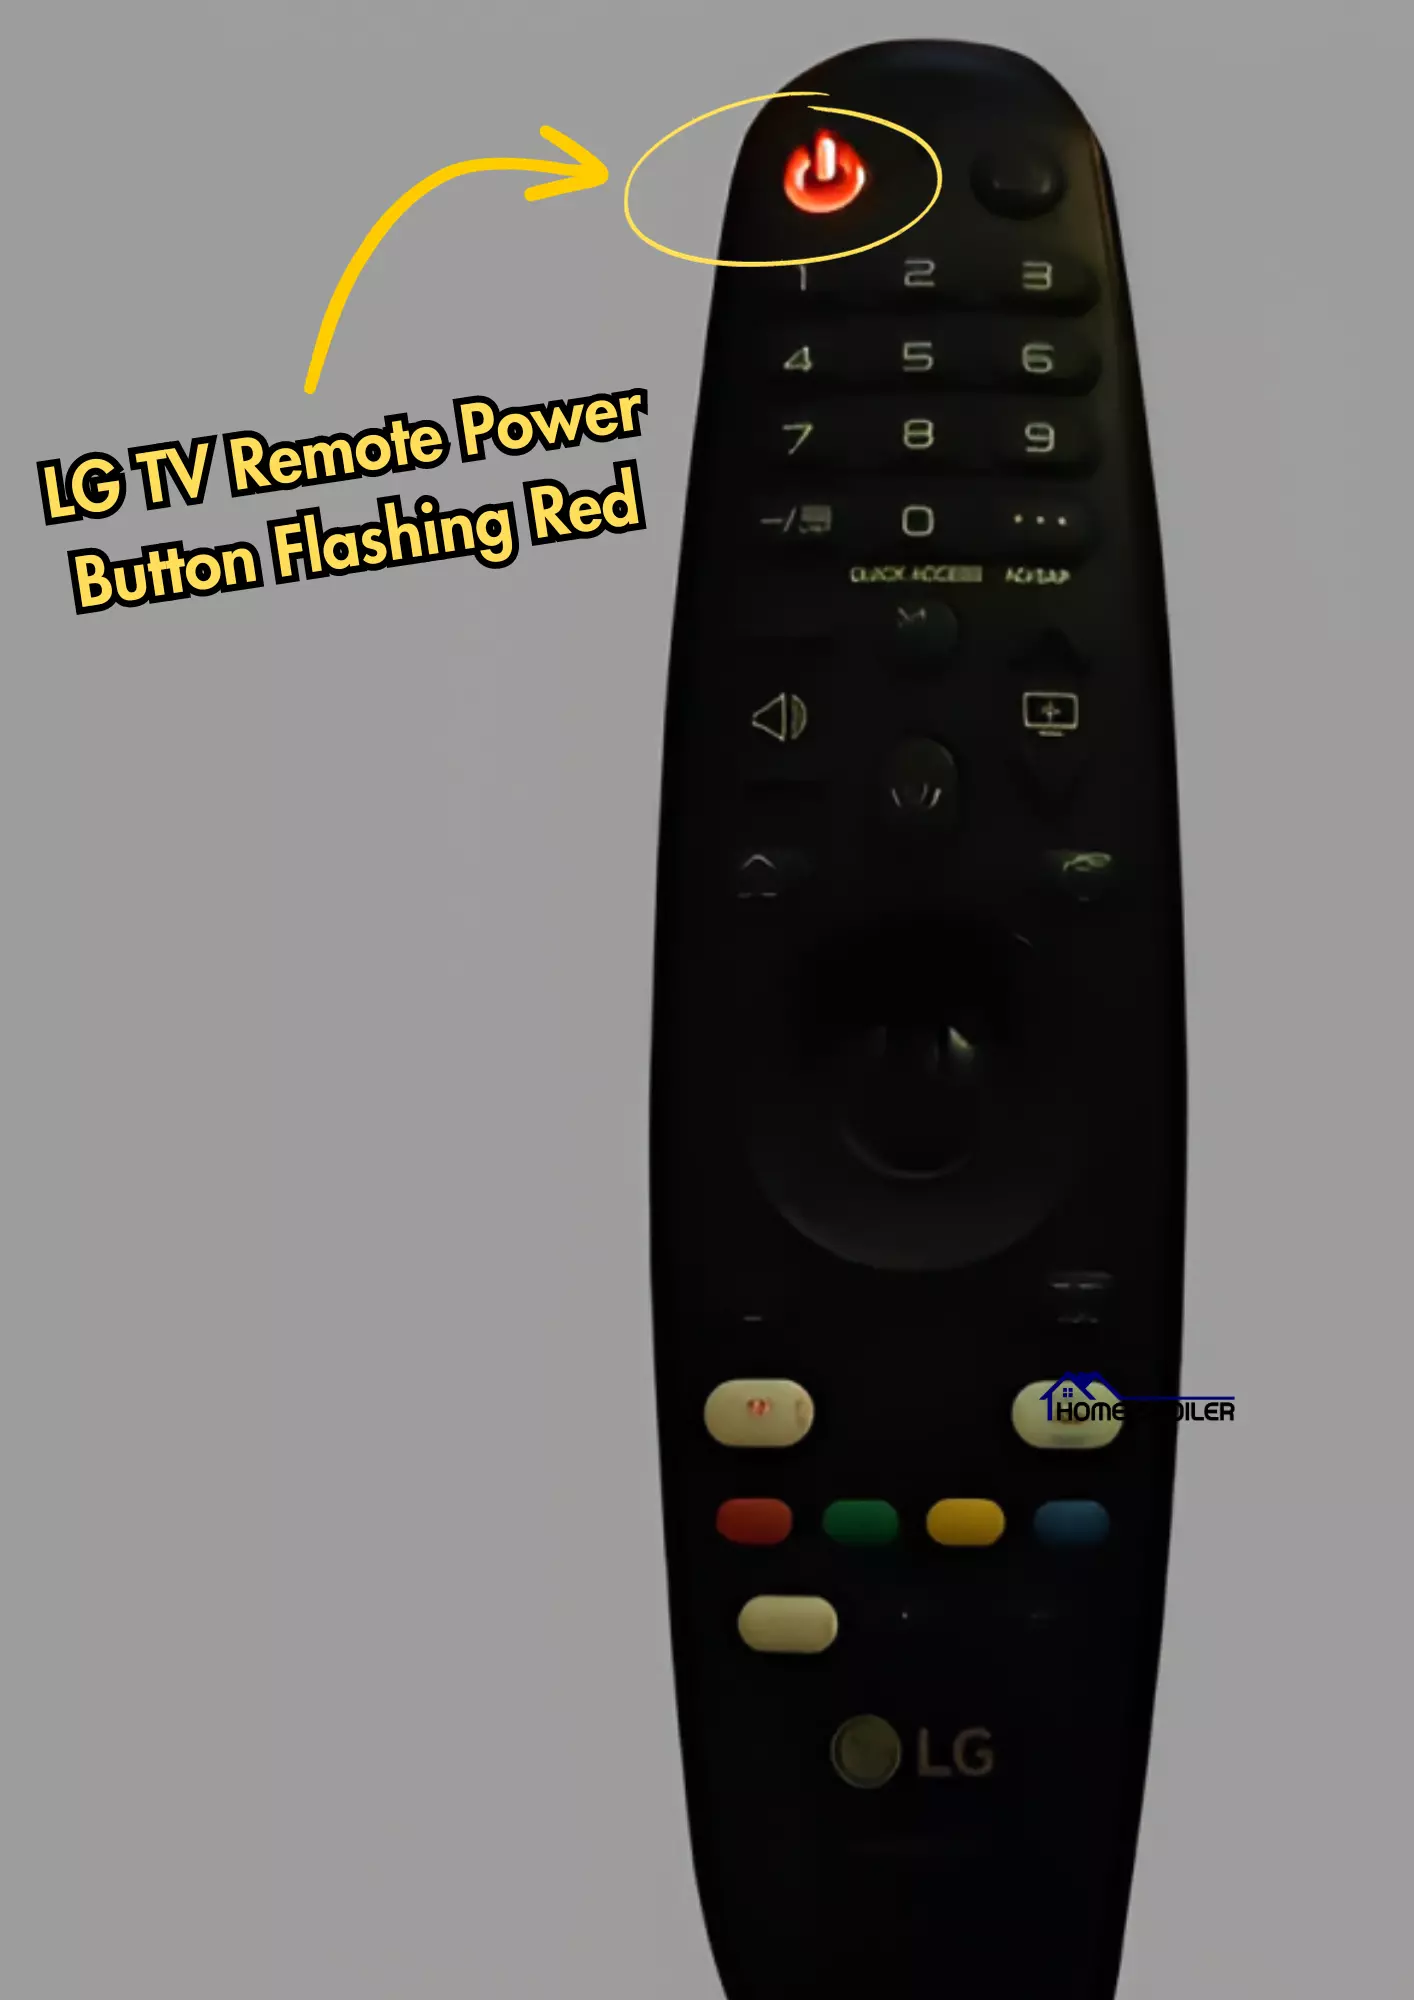 LG TV Remote Power Button Flashing Red